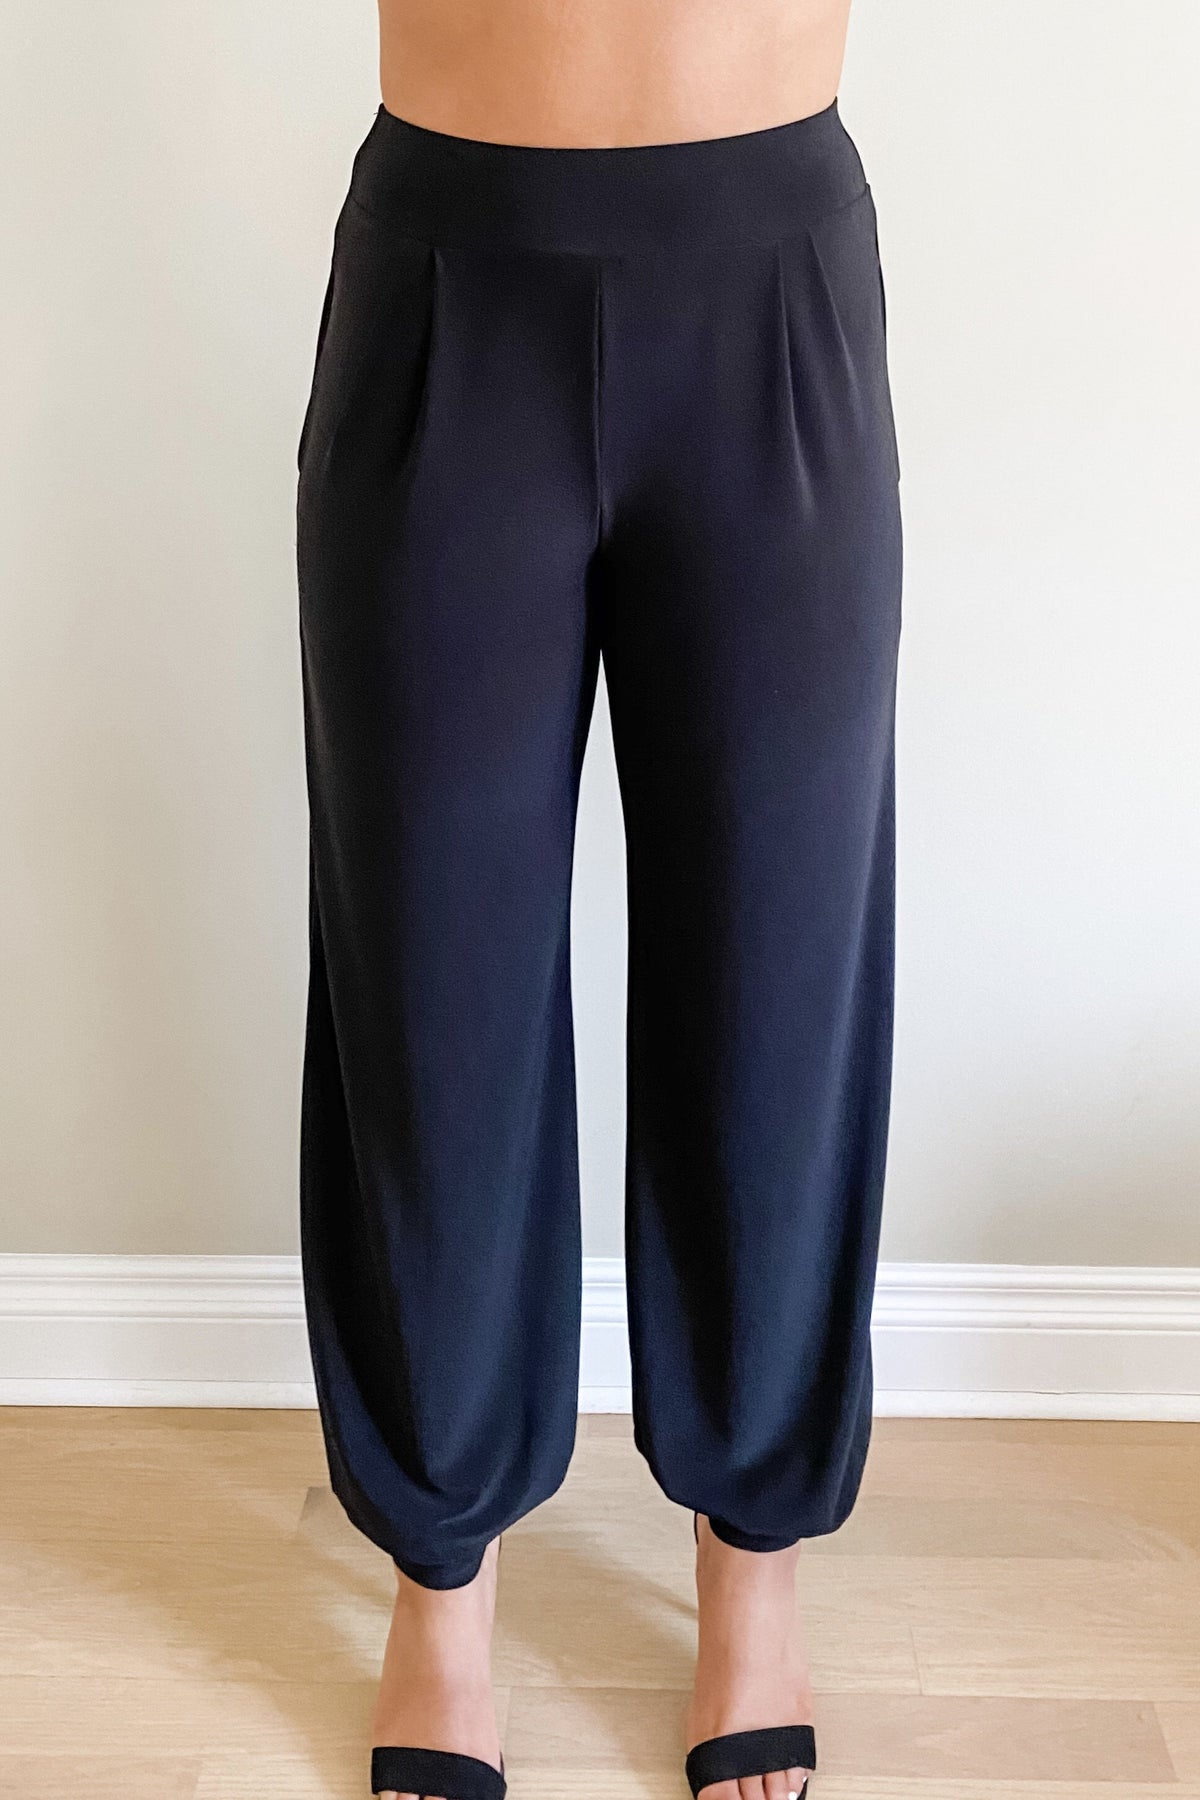 Pocket Pants : Wide-leg to Dressy Joggers front vire worn jappger style